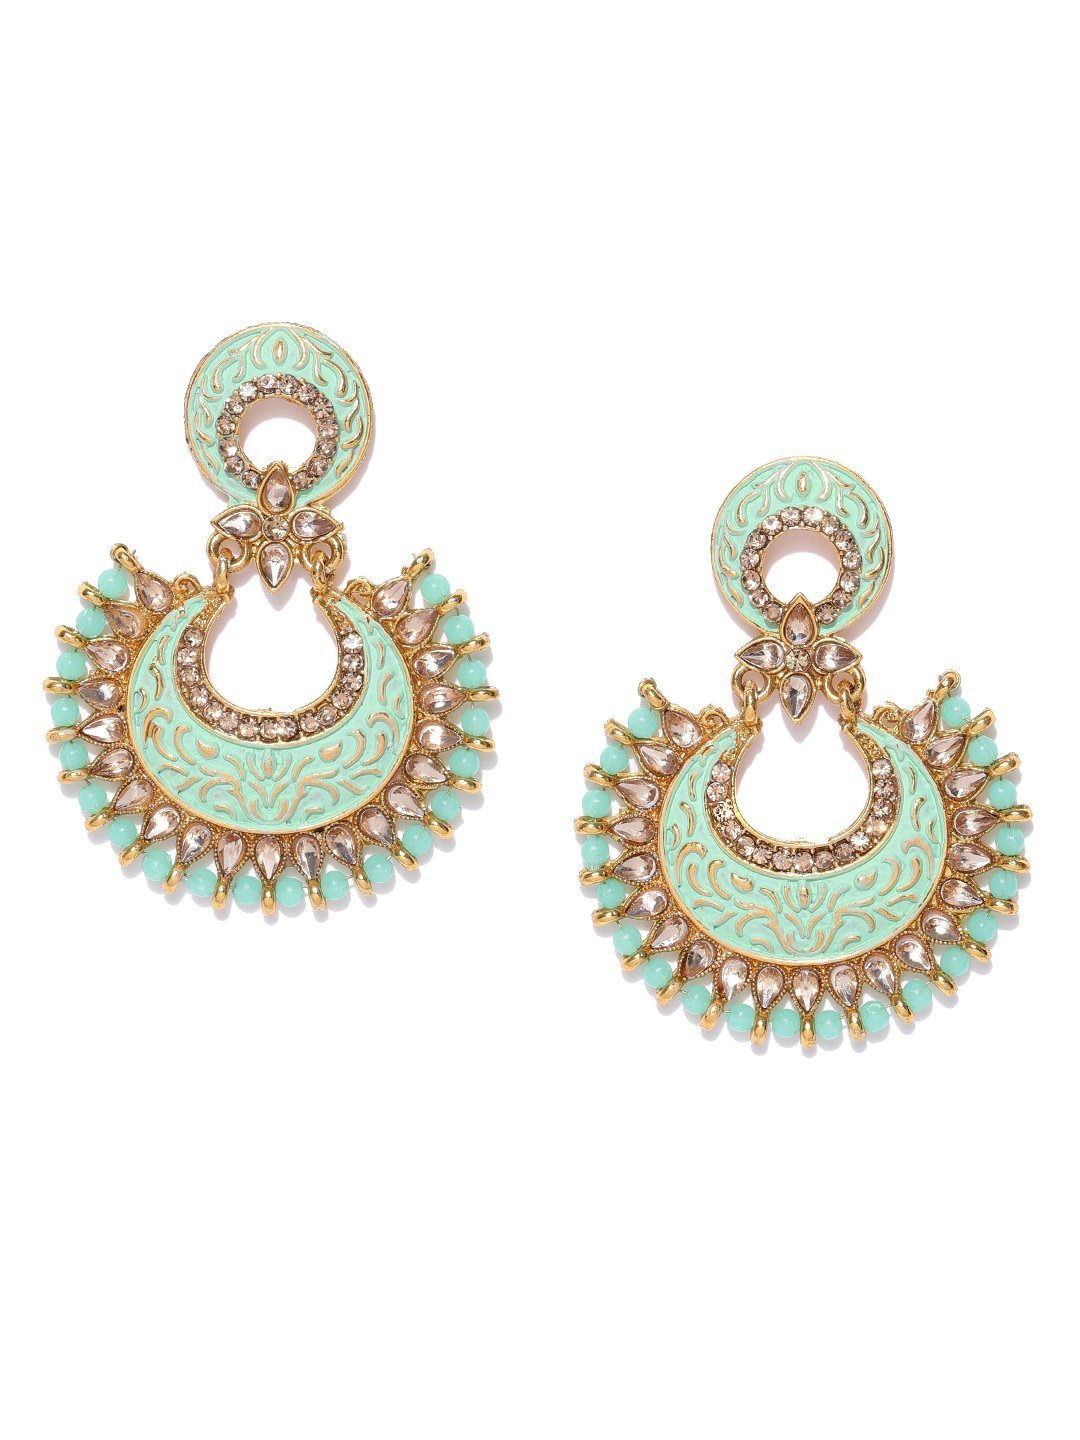 Women's Chand Bali Gold Plated Drop Earrings Sea Green Colour For Women And Girls - Priyaasi